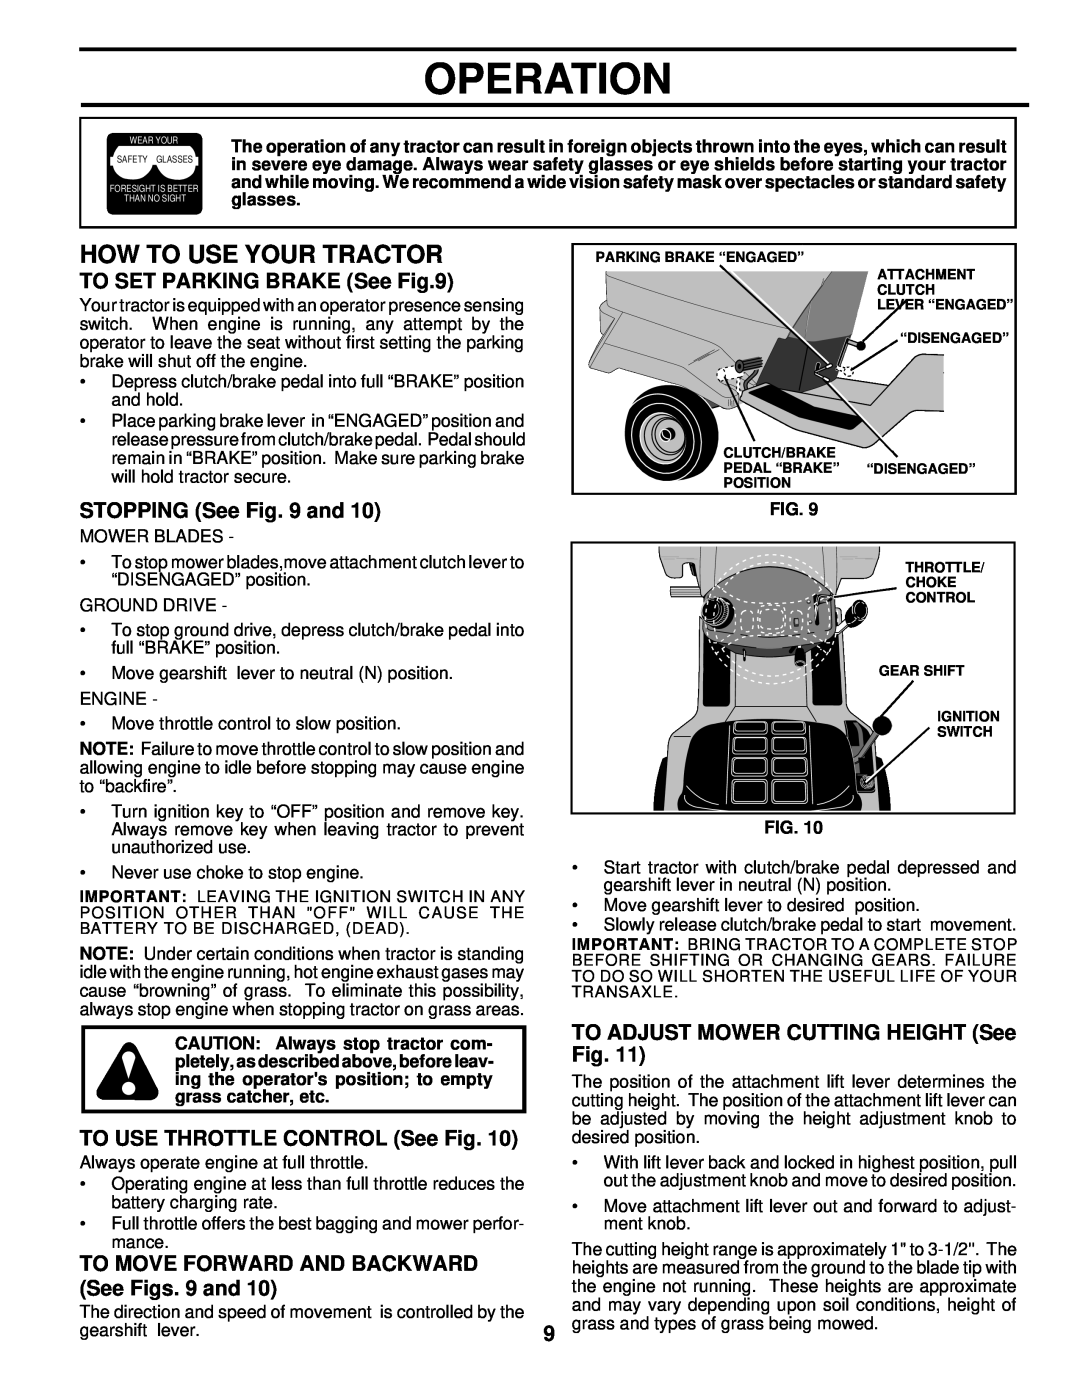 Husqvarna LR122 How To Use Your Tractor, TO SET PARKING BRAKE See, STOPPING See and, TO USE THROTTLE CONTROL See Fig 